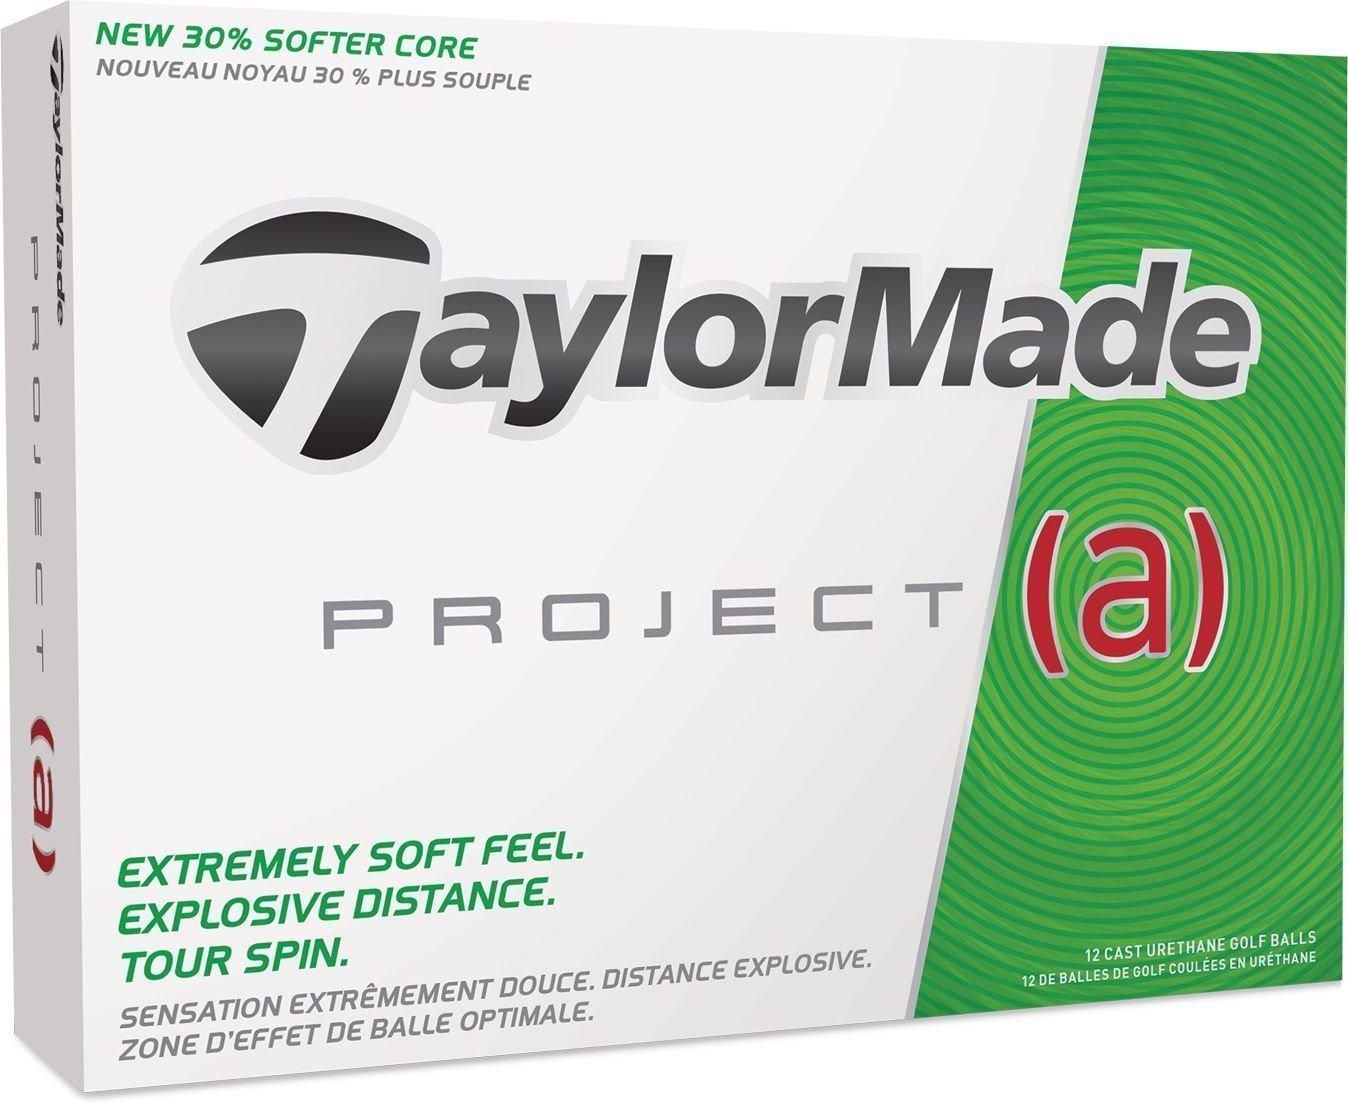 Golf Balls TaylorMade Project (a) Ball White